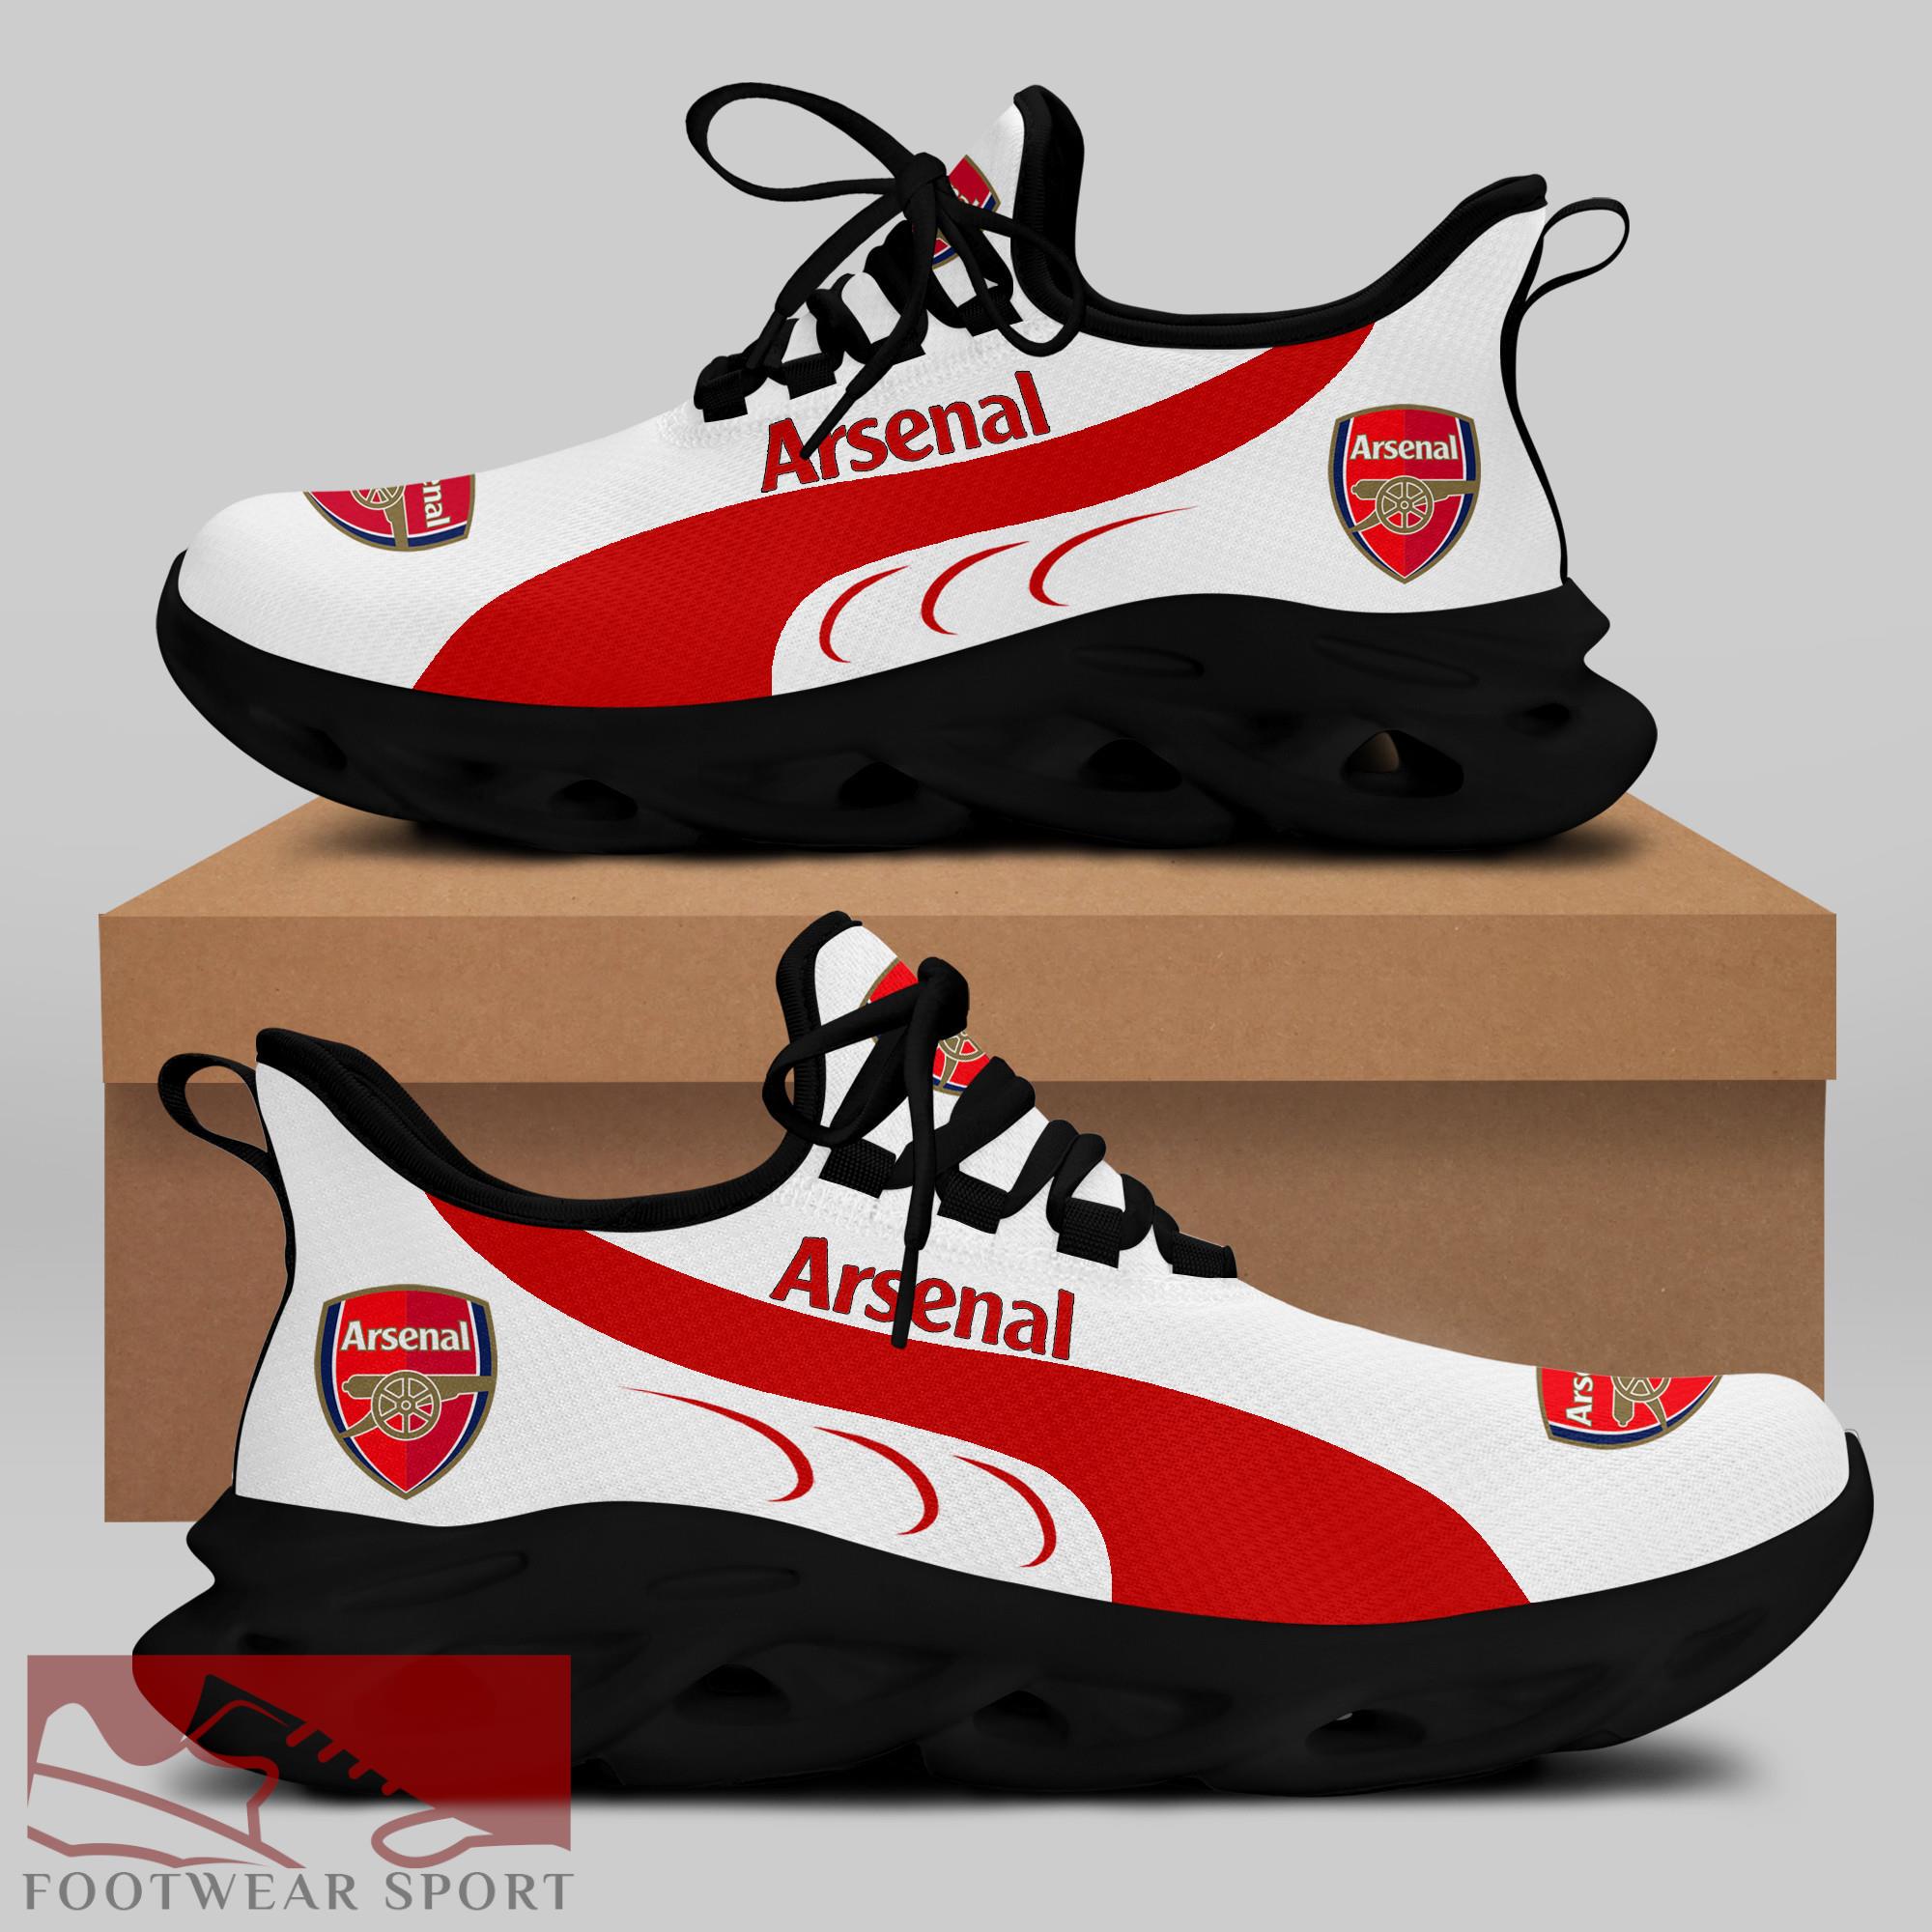 Arsenal Fans EPL Chunky Sneakers Fashion-forward Max Soul Shoes For Men And Women - Arsenal Chunky Sneakers White Black Max Soul Shoes For Men And Women Photo 2